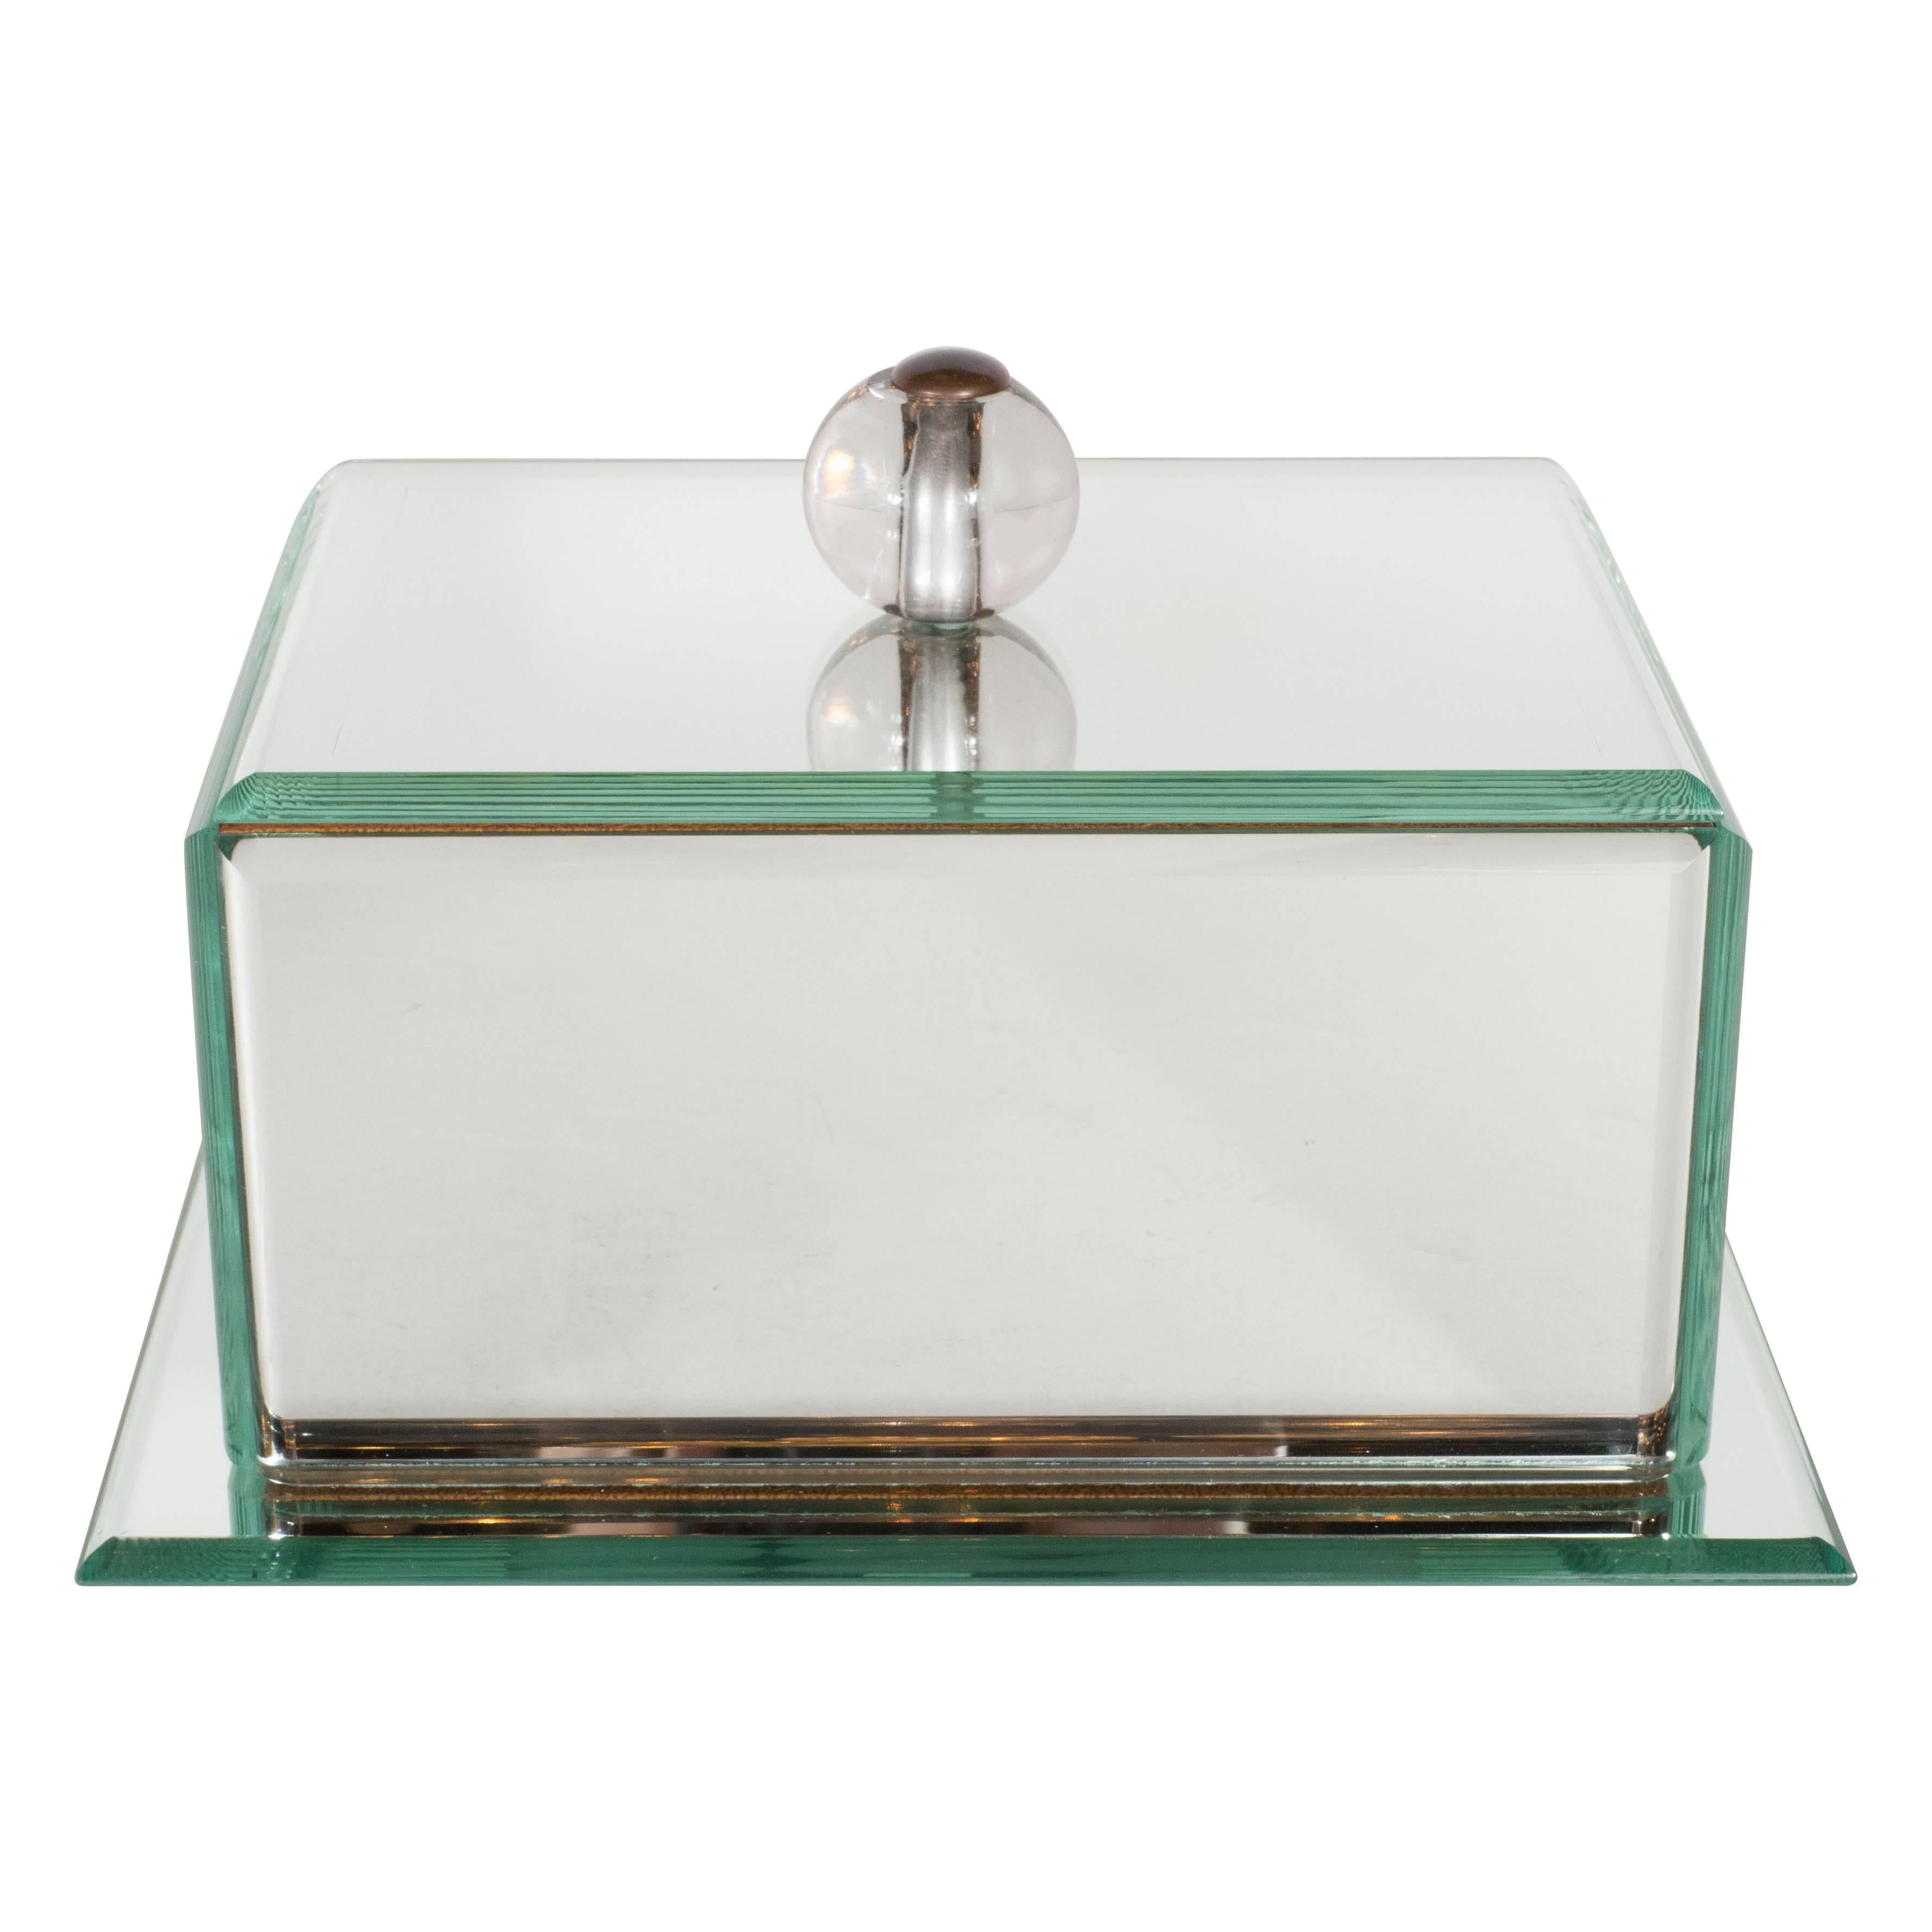 Elegant Art Deco Mirrored Glass Box with Round Beveled Edges and Glass Ball Pull